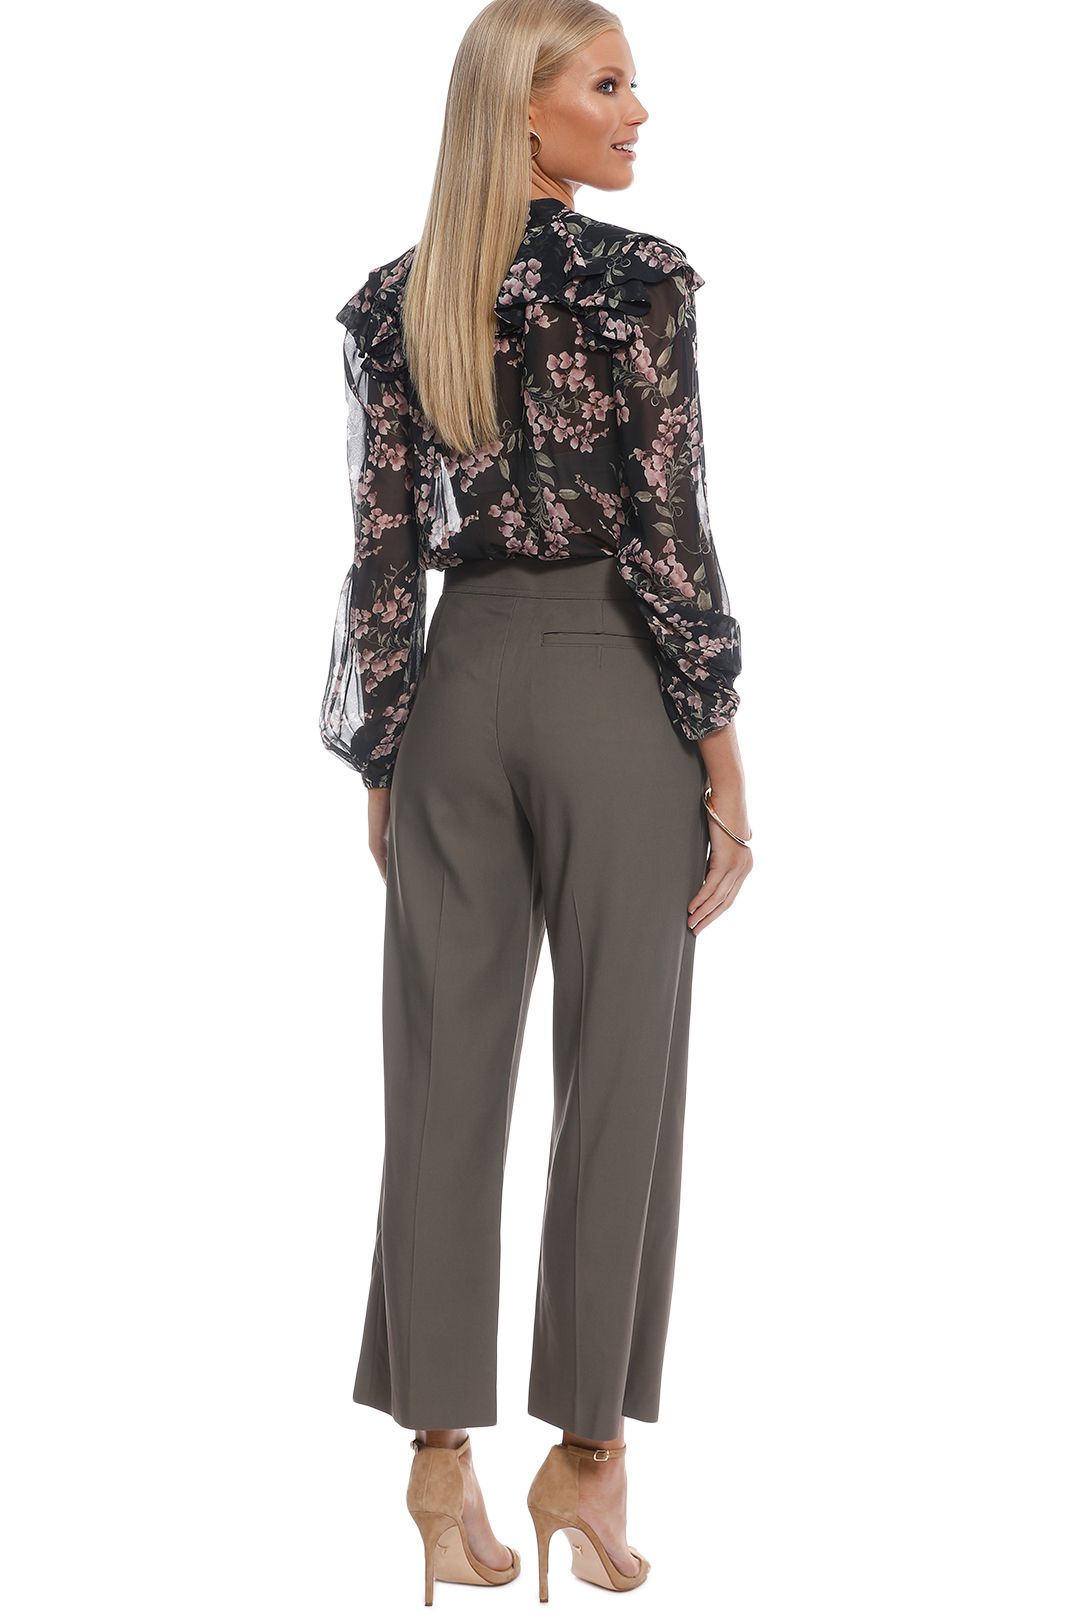 Scanlan Theodore - Crepe Tailored Trouser - Taupe - Back